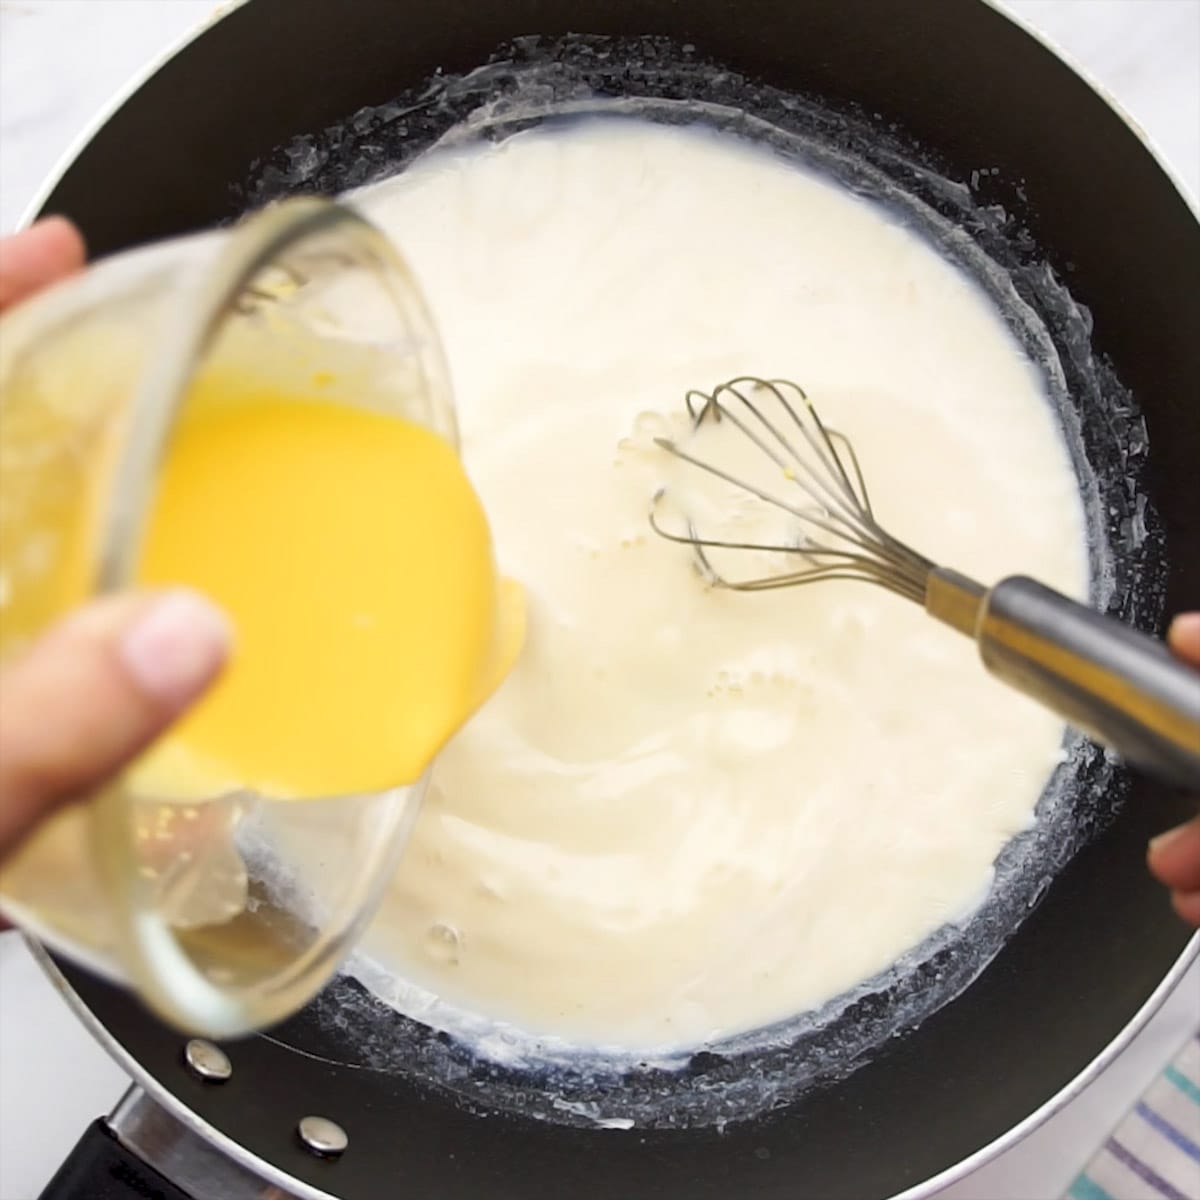 whisk it in a pan